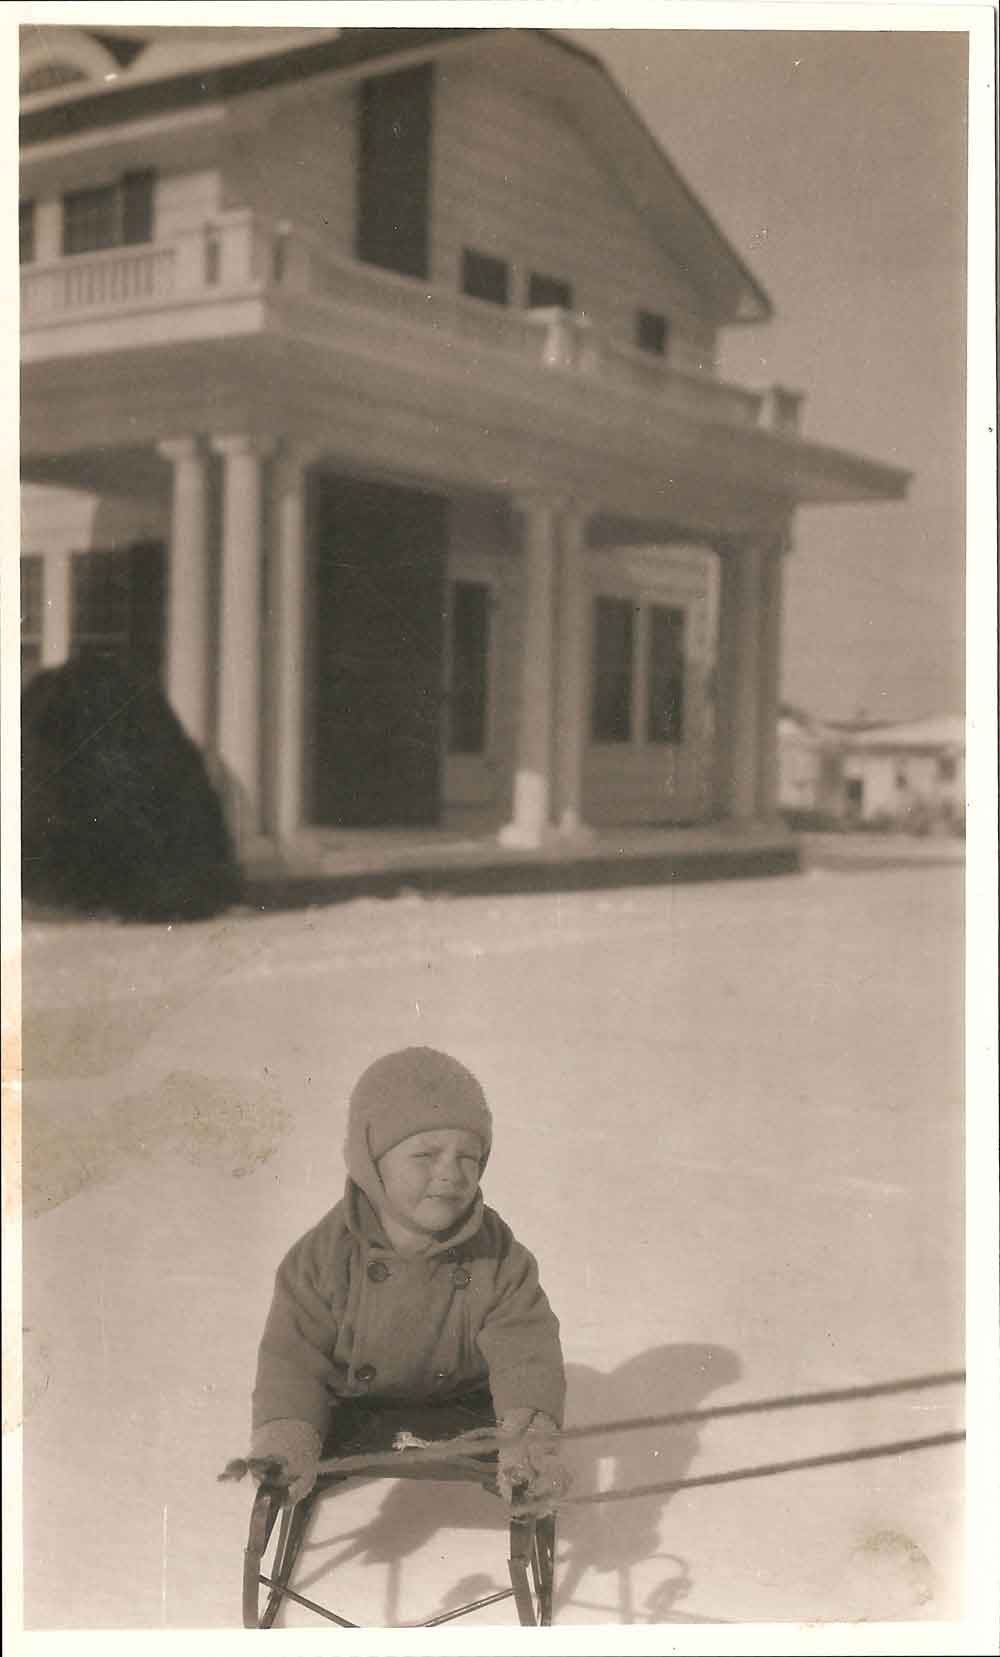 (HTC.2010.8.34) - Child (probably Frank Hightower) Sledding in Front of the Keene C. Burwell Home, 415 NW 21, c. 1926